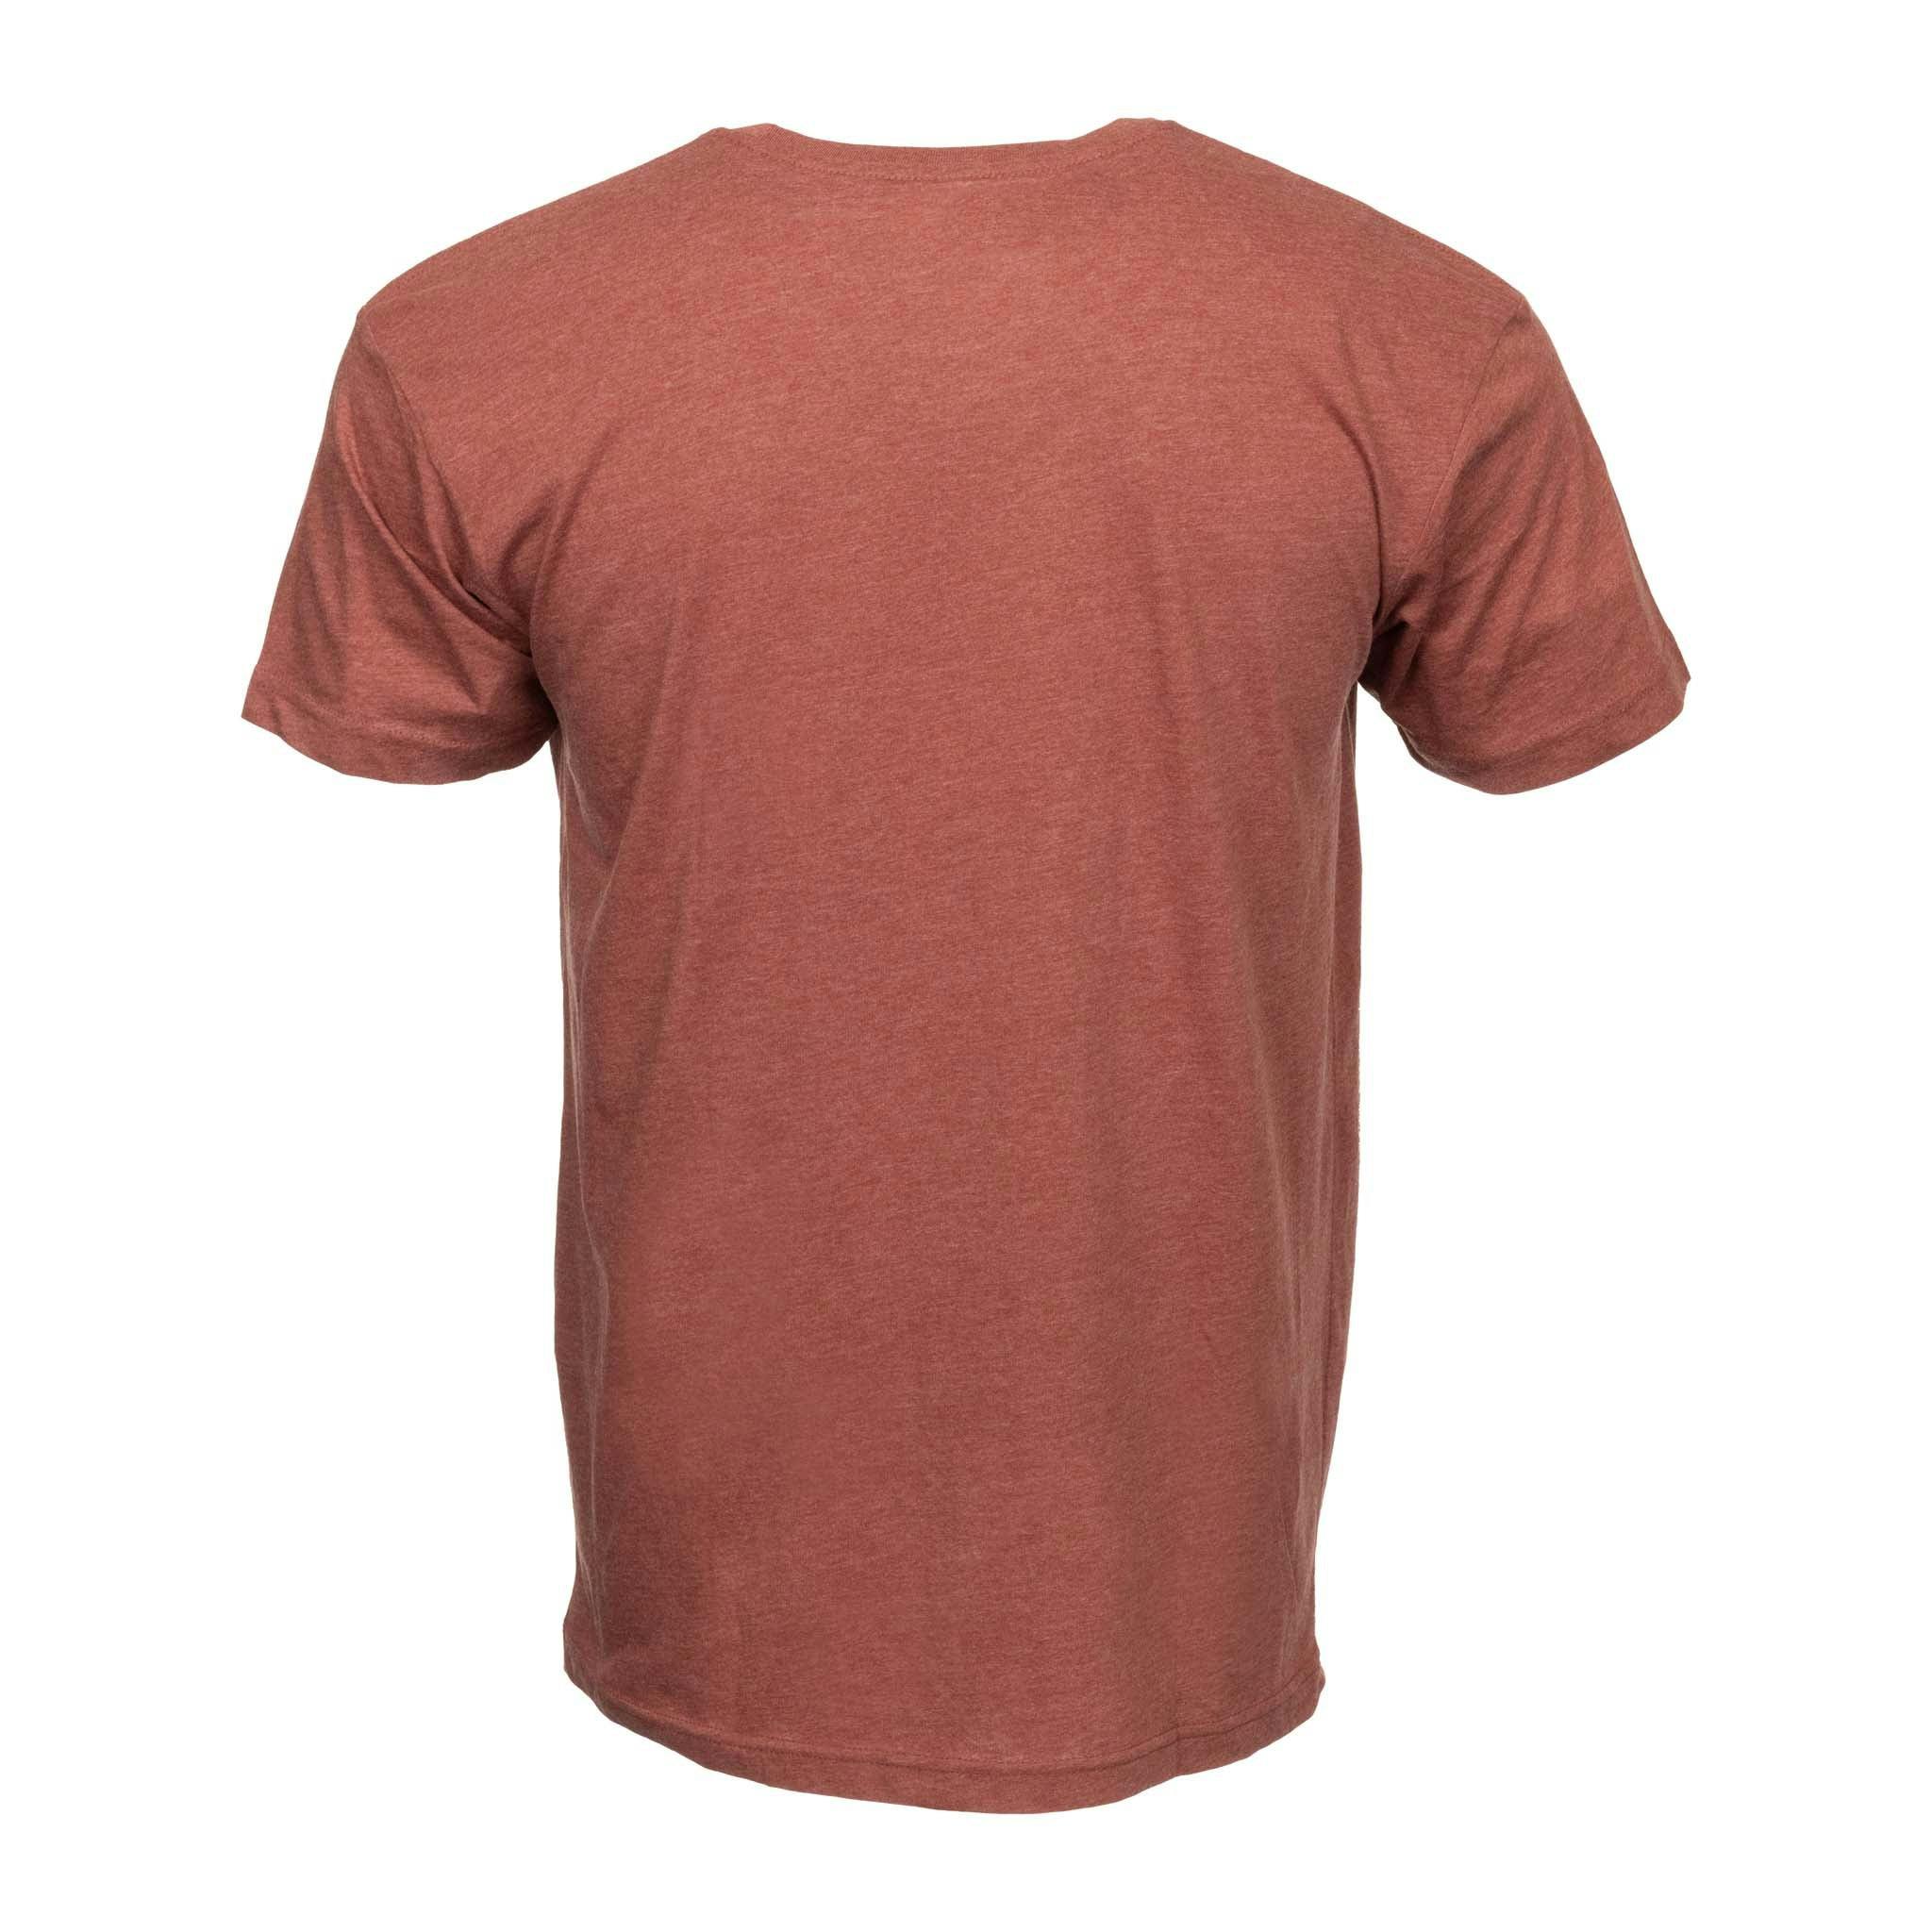 Sierra Nevada Handcrafted T-Shirt Rust - Back view